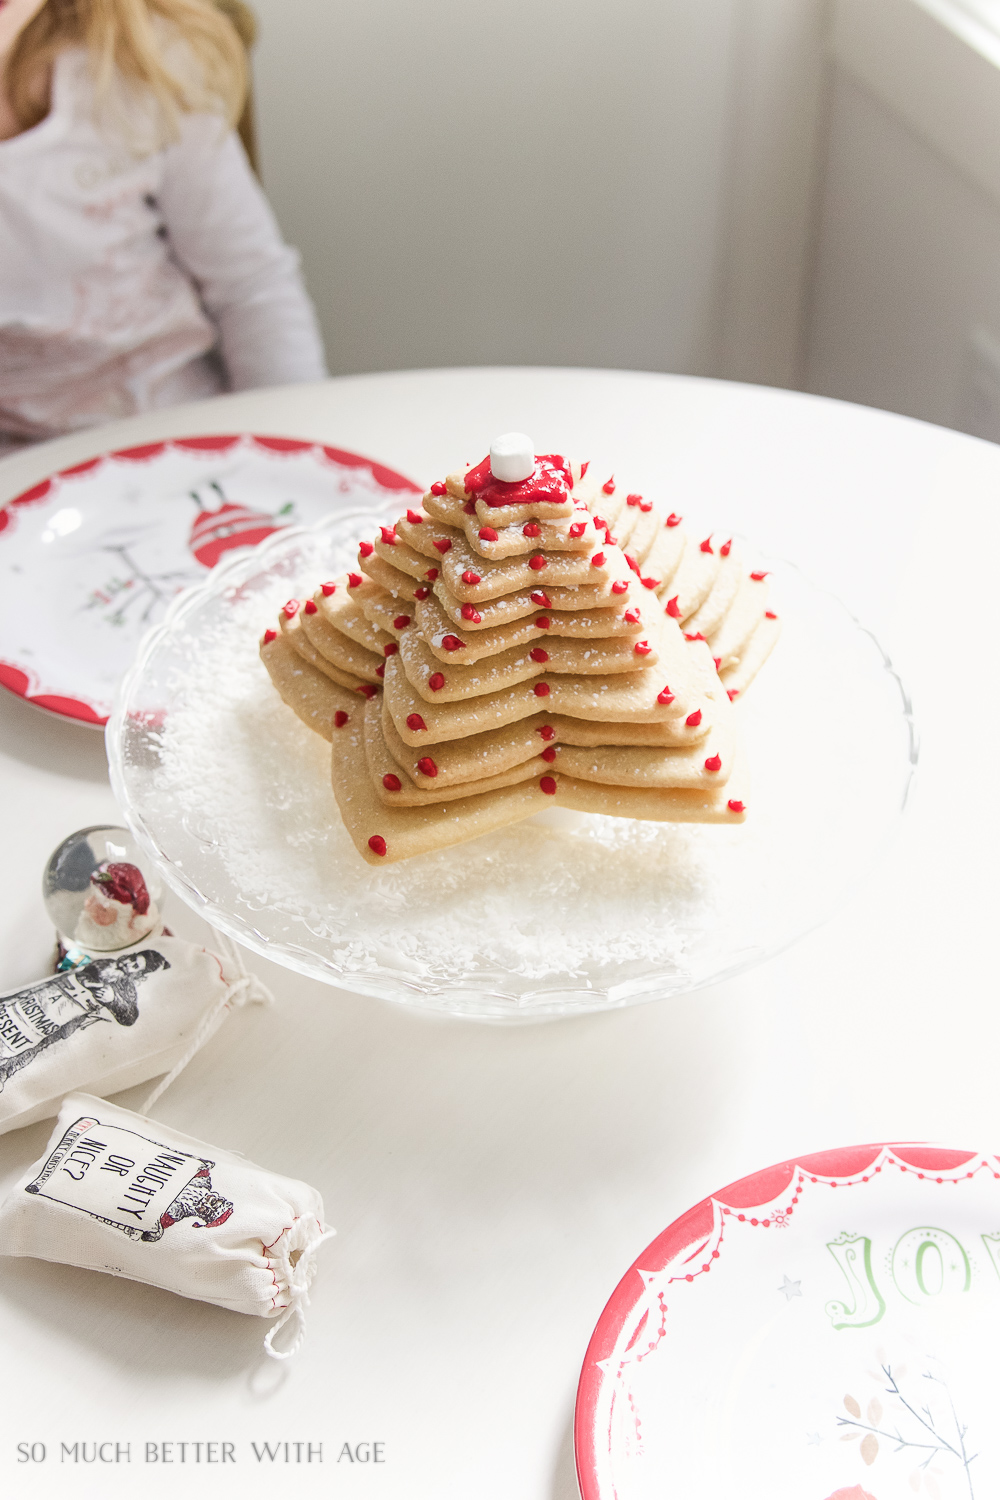 Red icing and icing sugar on the cookie tree.